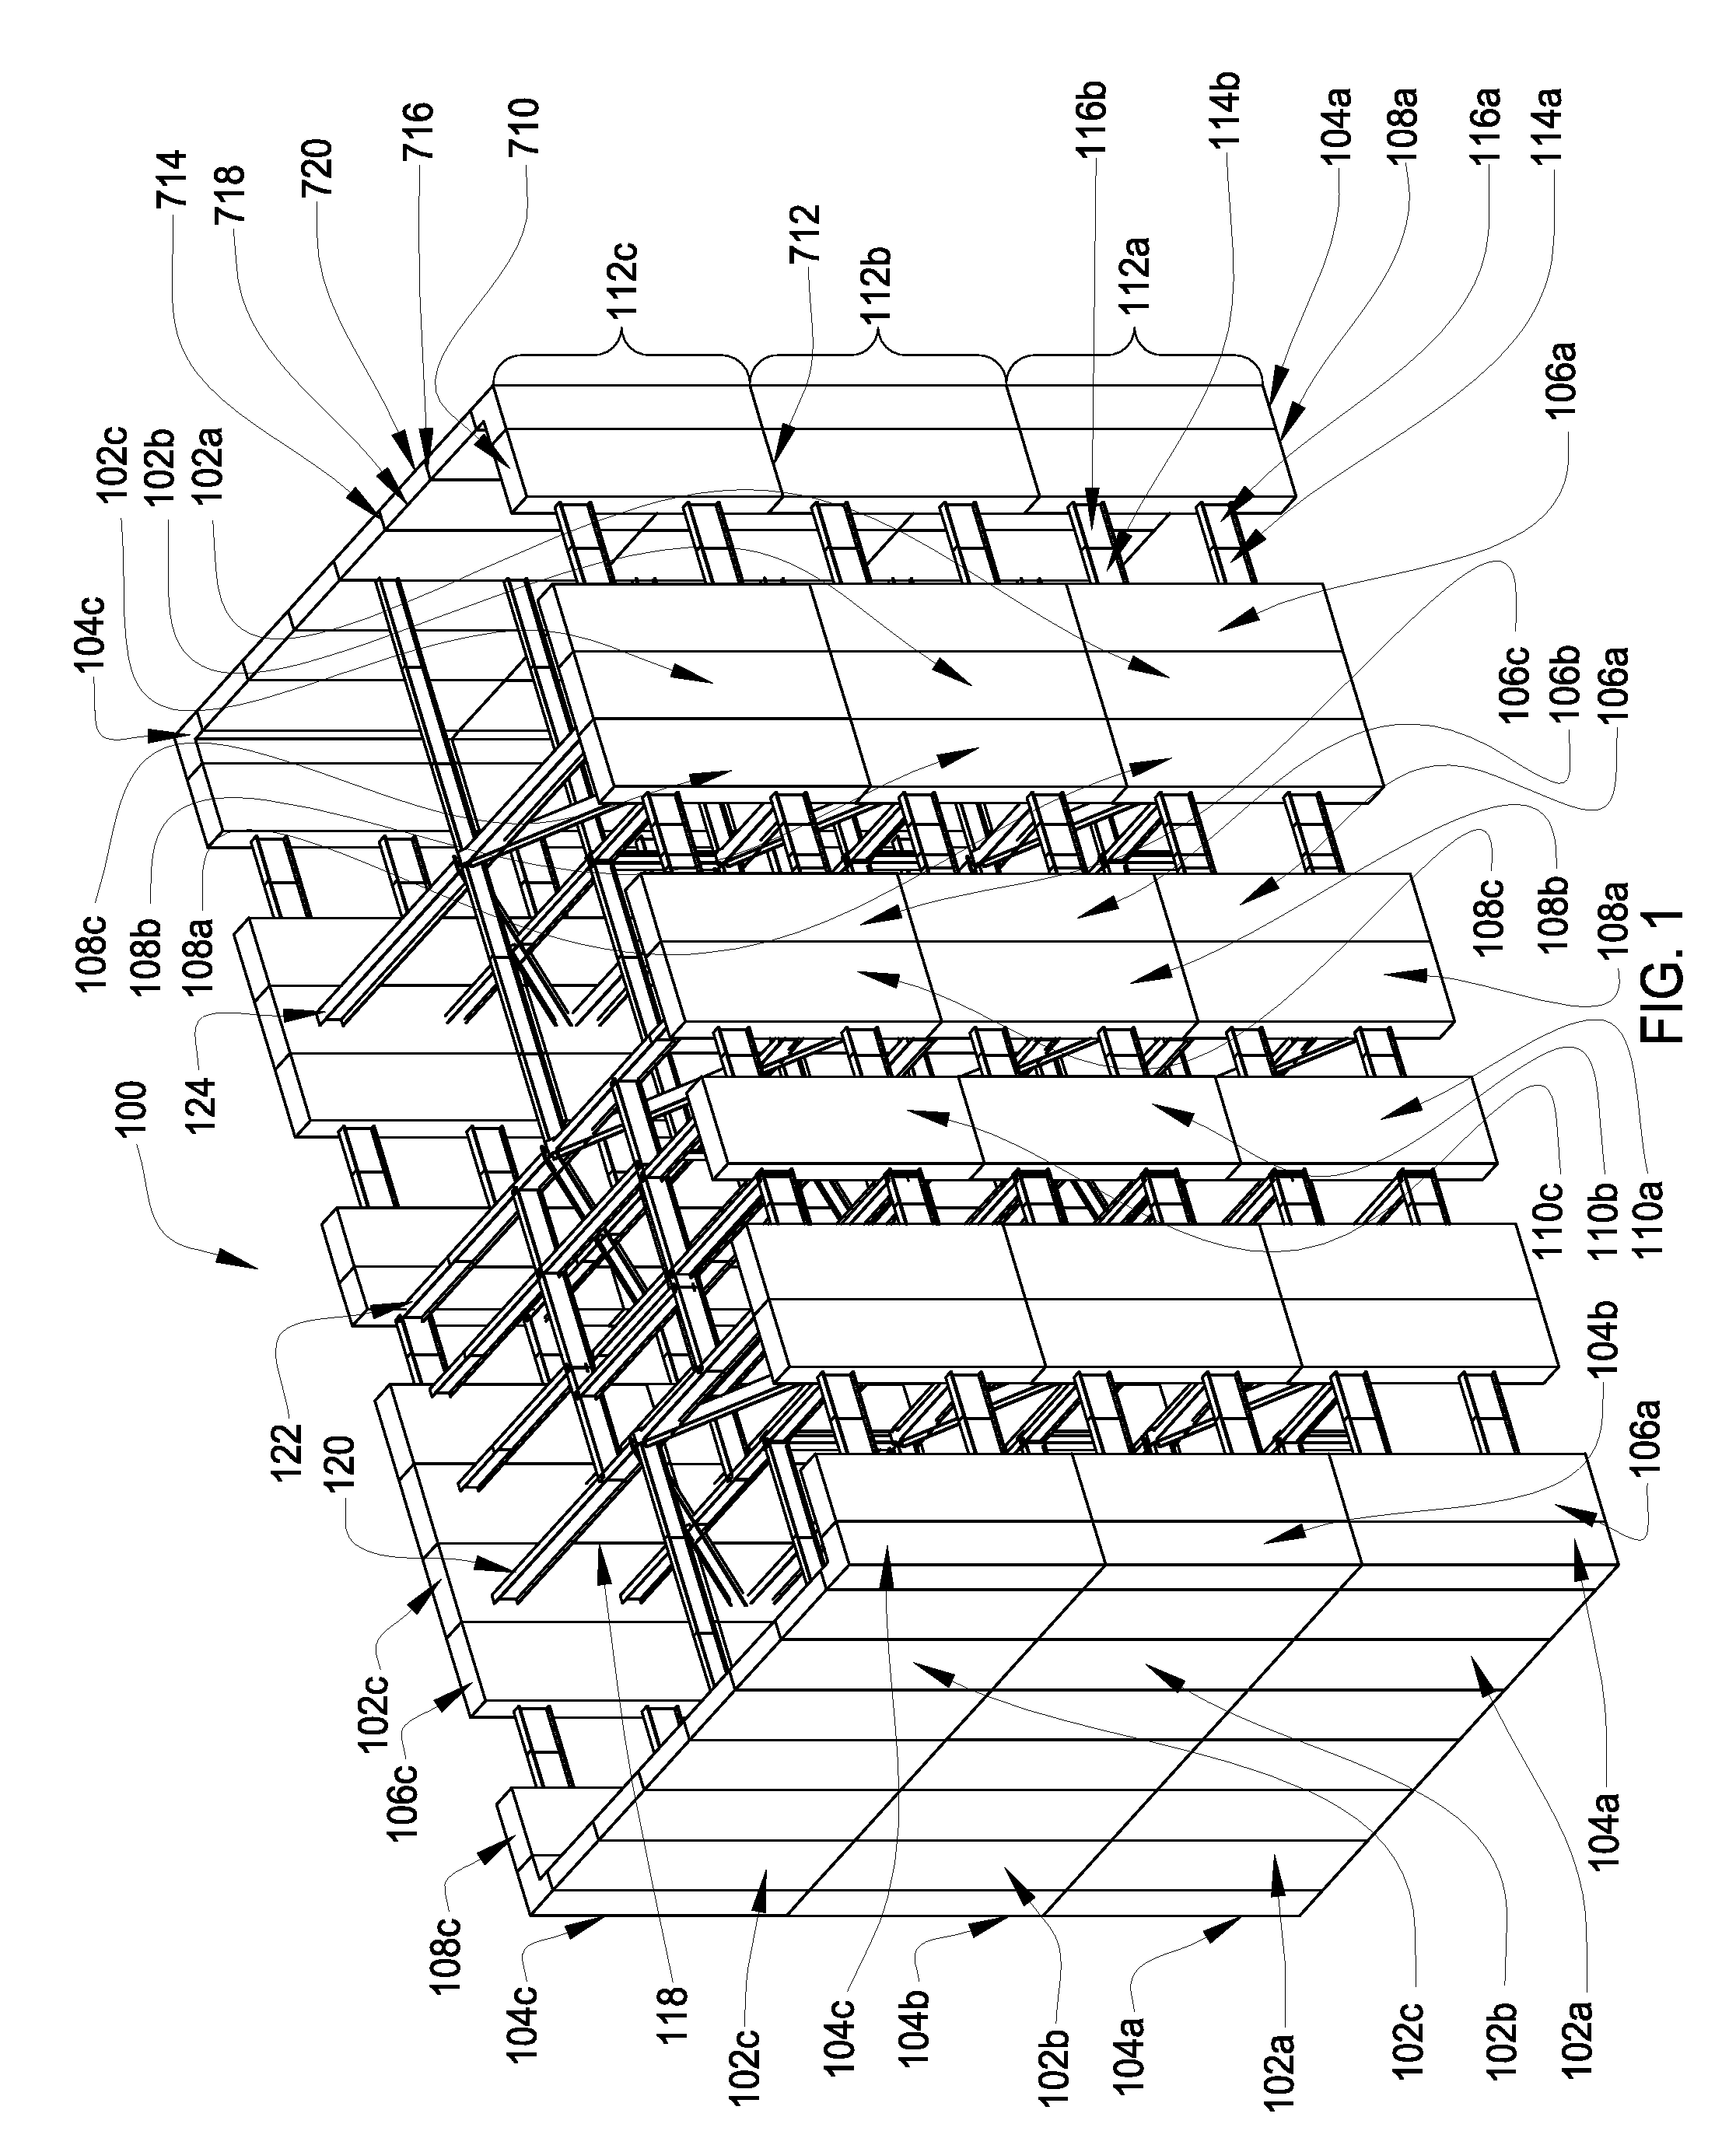 Precast Wall Panels and Method of Erecting a High-Rise Building Using the Panels